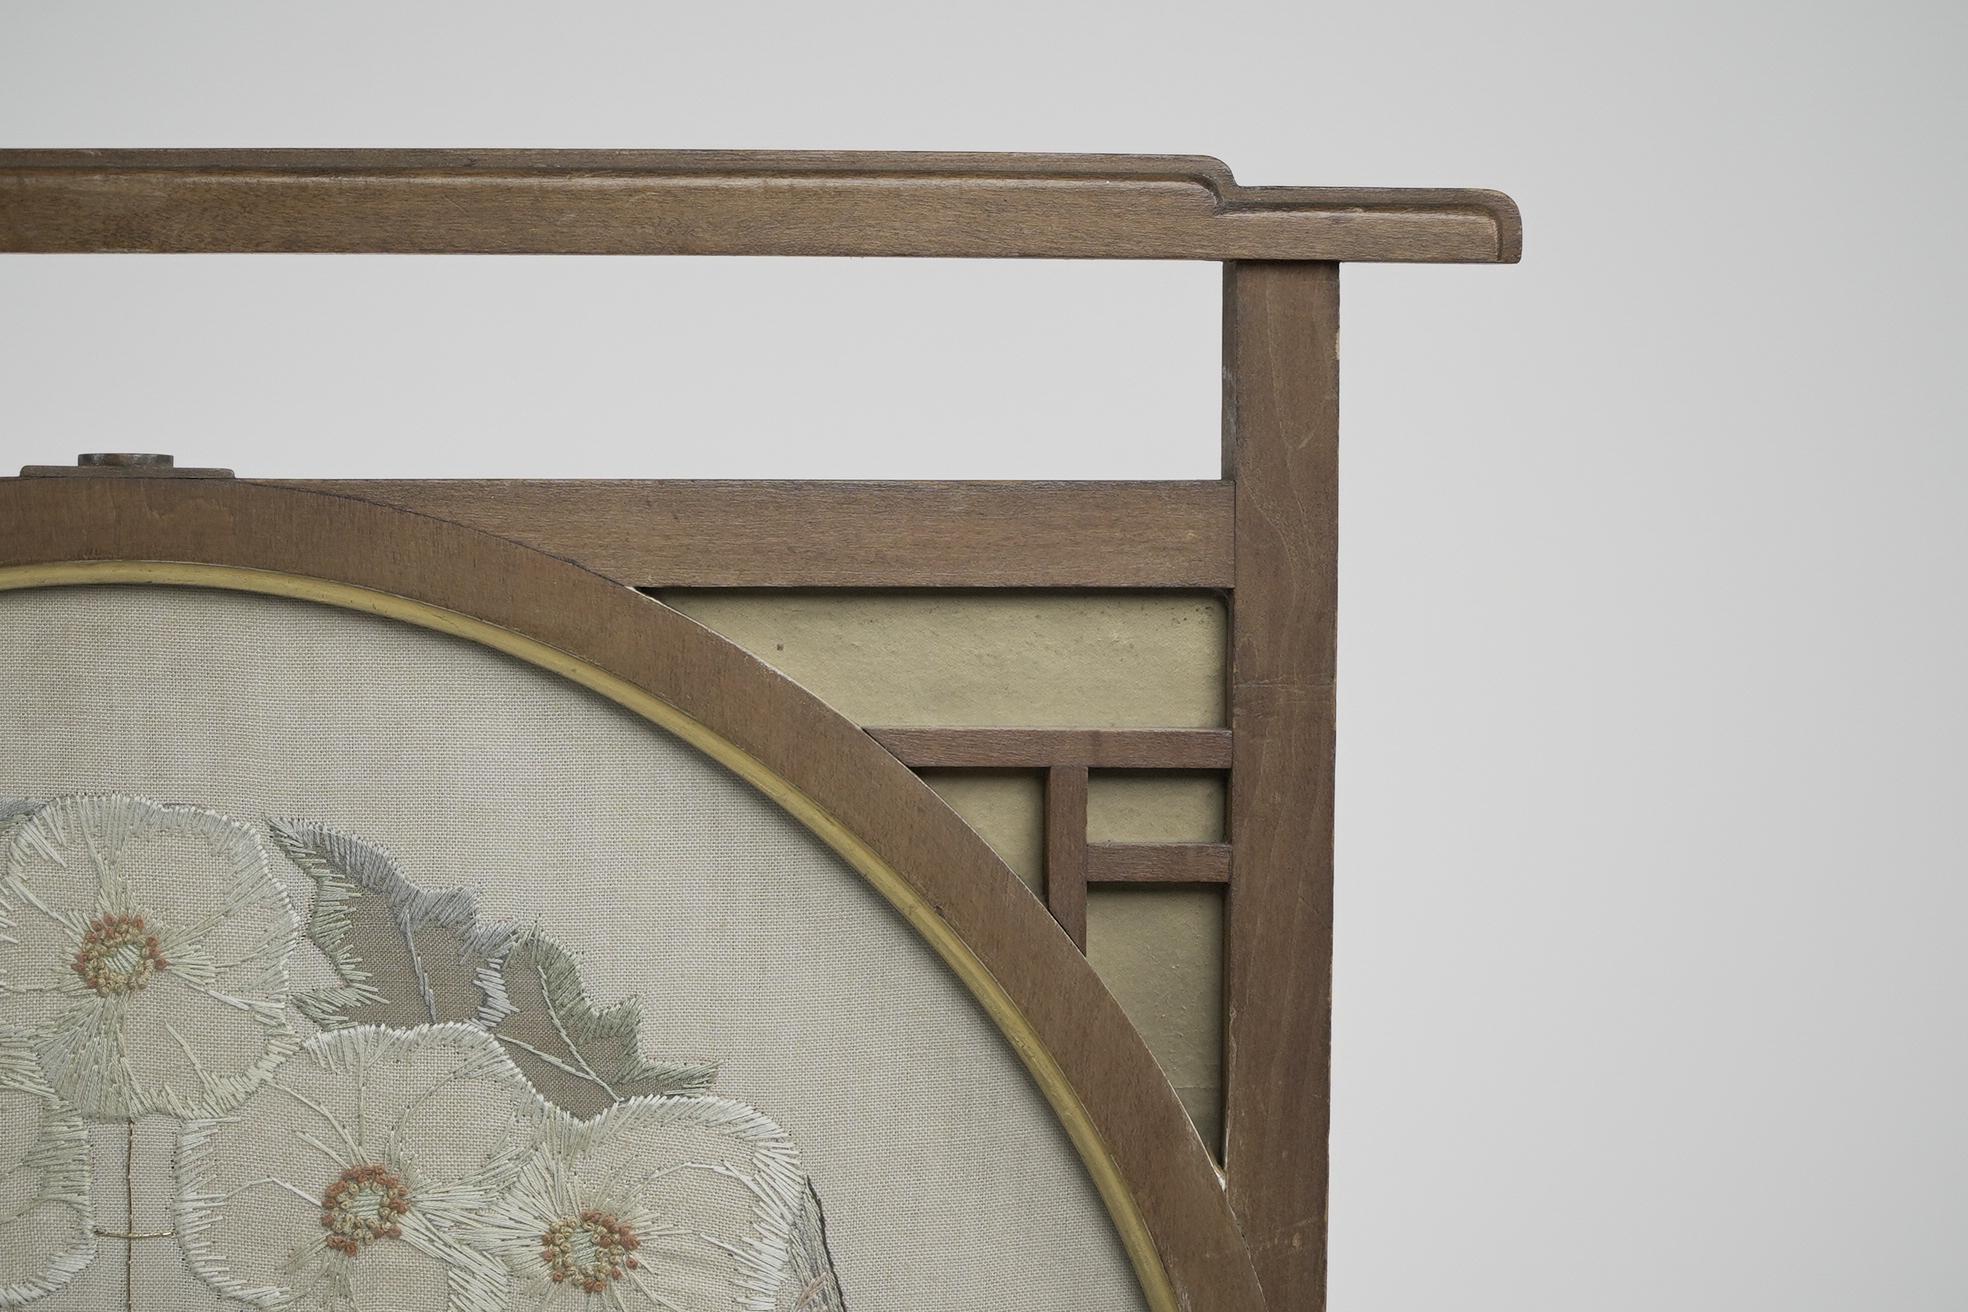 Late 19th Century E W Godwin style. An Anglo-Japanese fire screen with a Japanese silk embroidery. For Sale